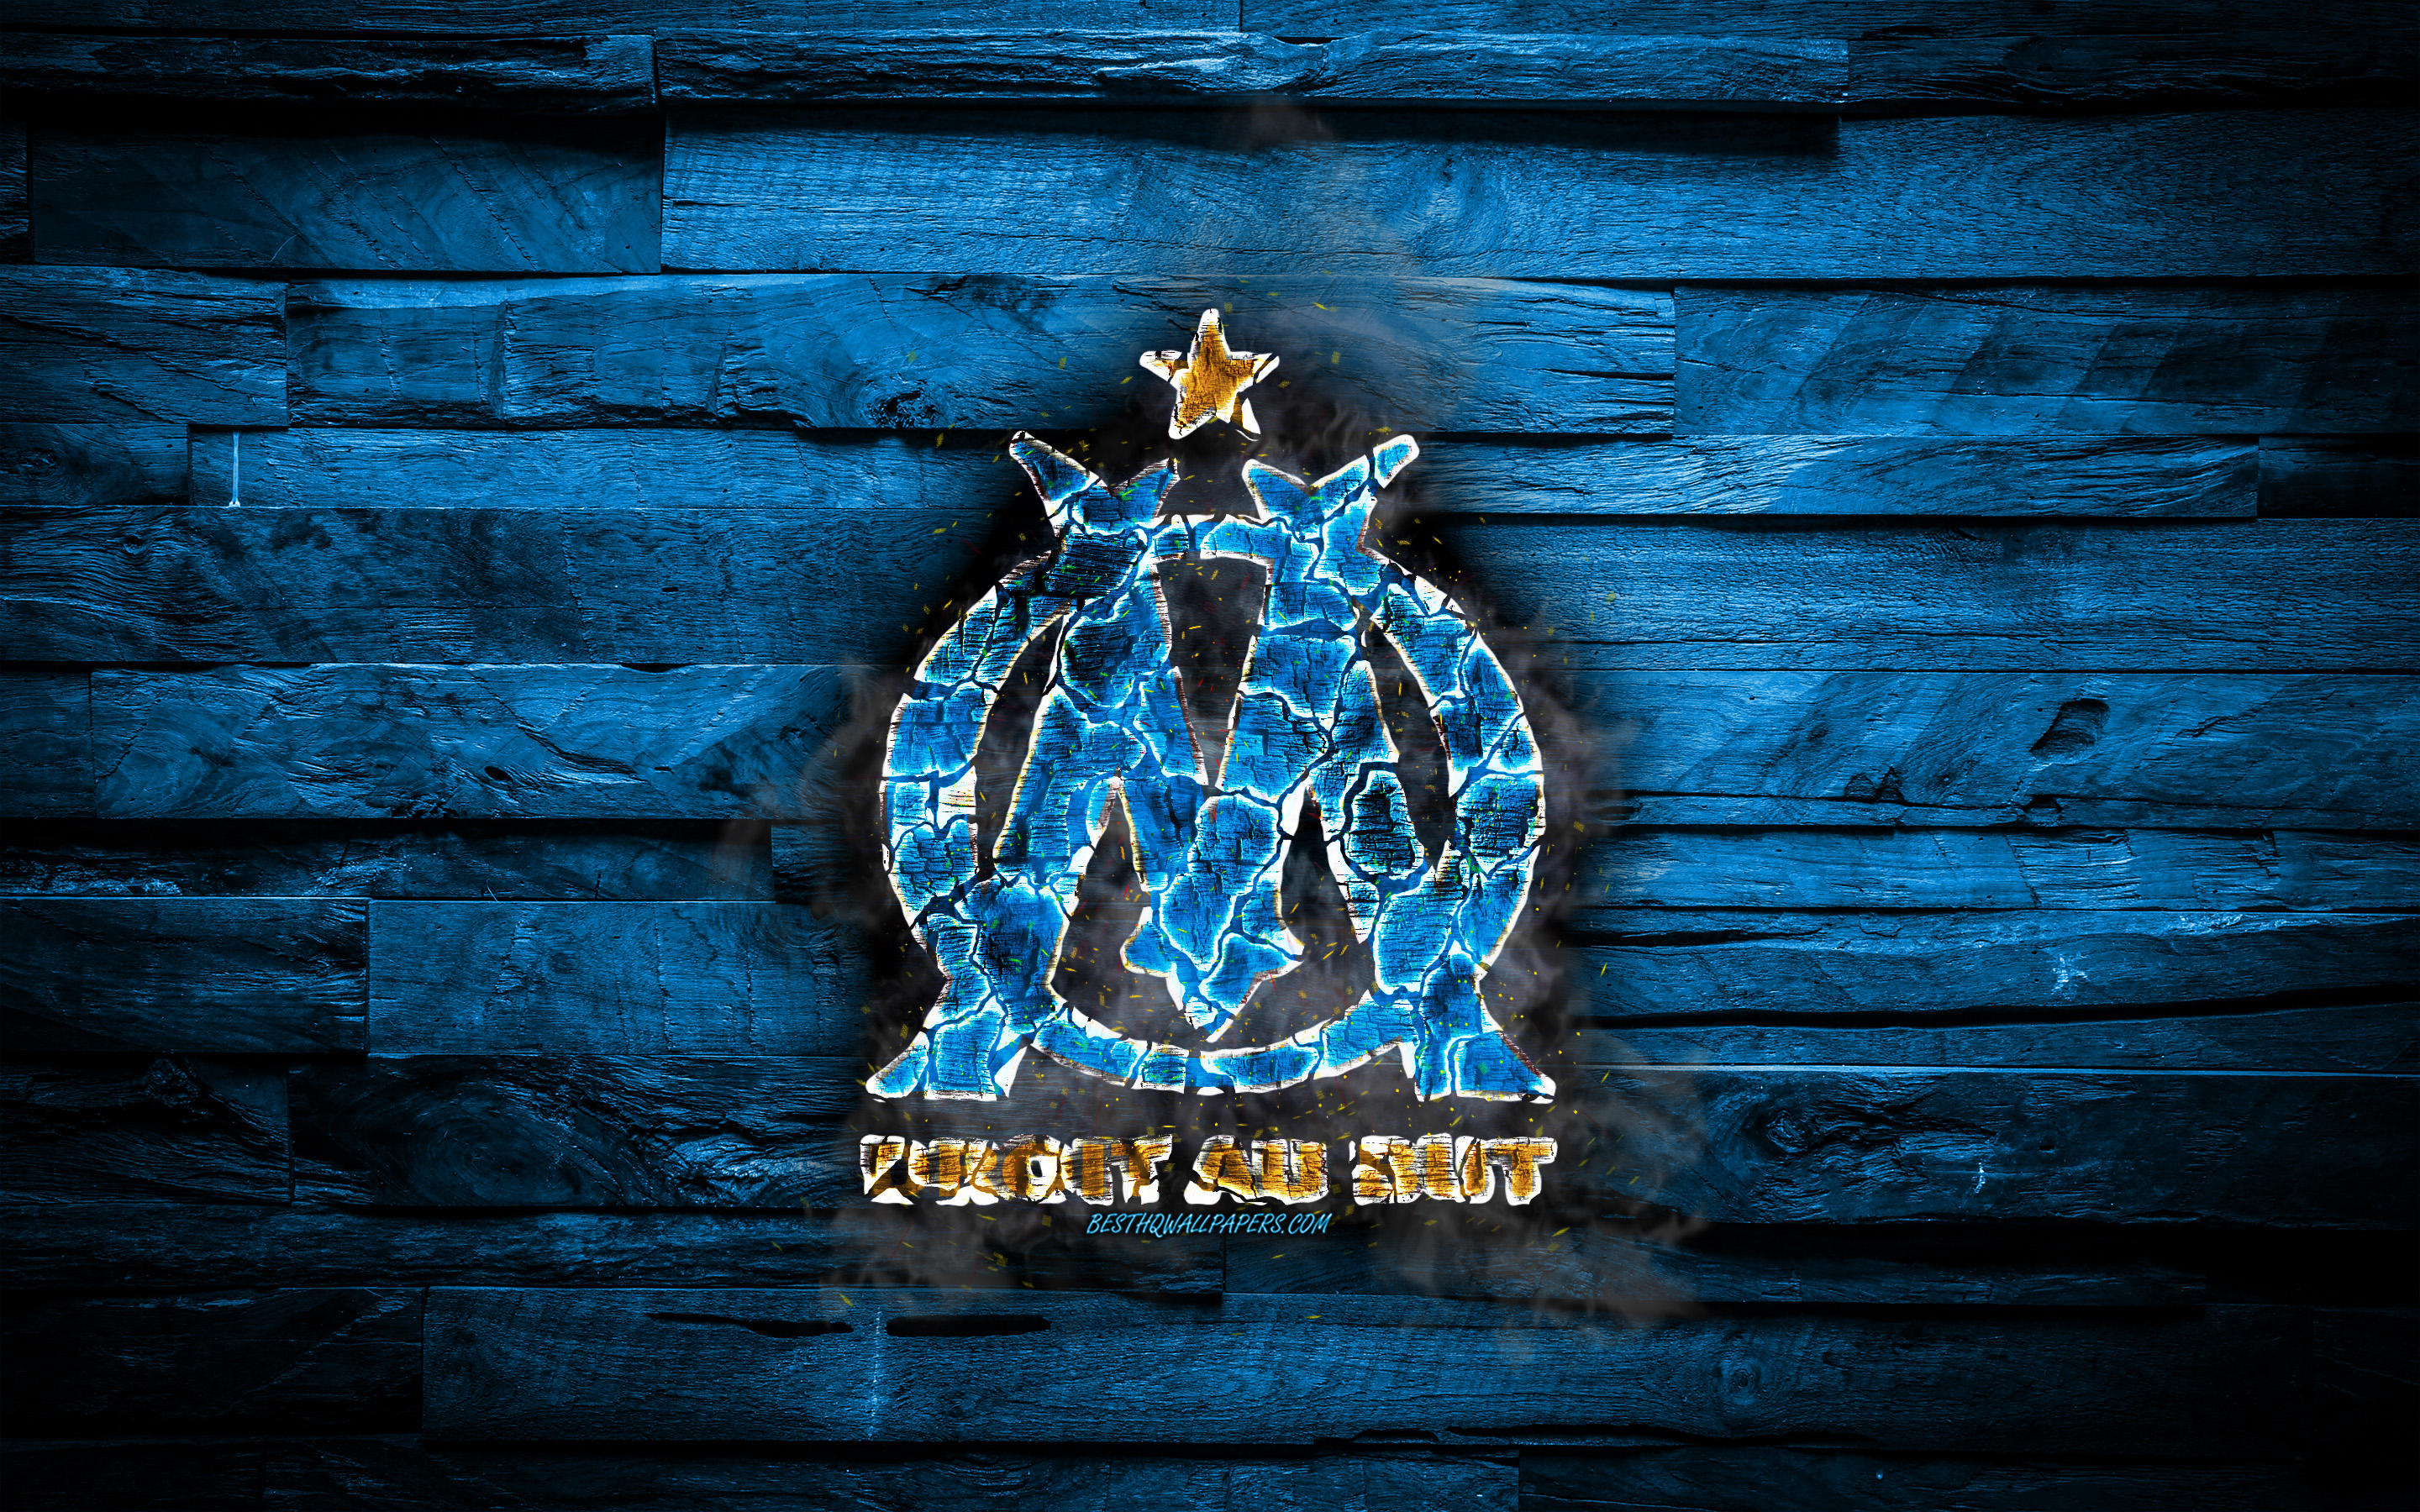 Download wallpapers olympique marseille fc fiery logo om ligue blue wooden background french football club grunge olympique de marseille football soccer olympique marseille logo fire texture france for desktop with resolution